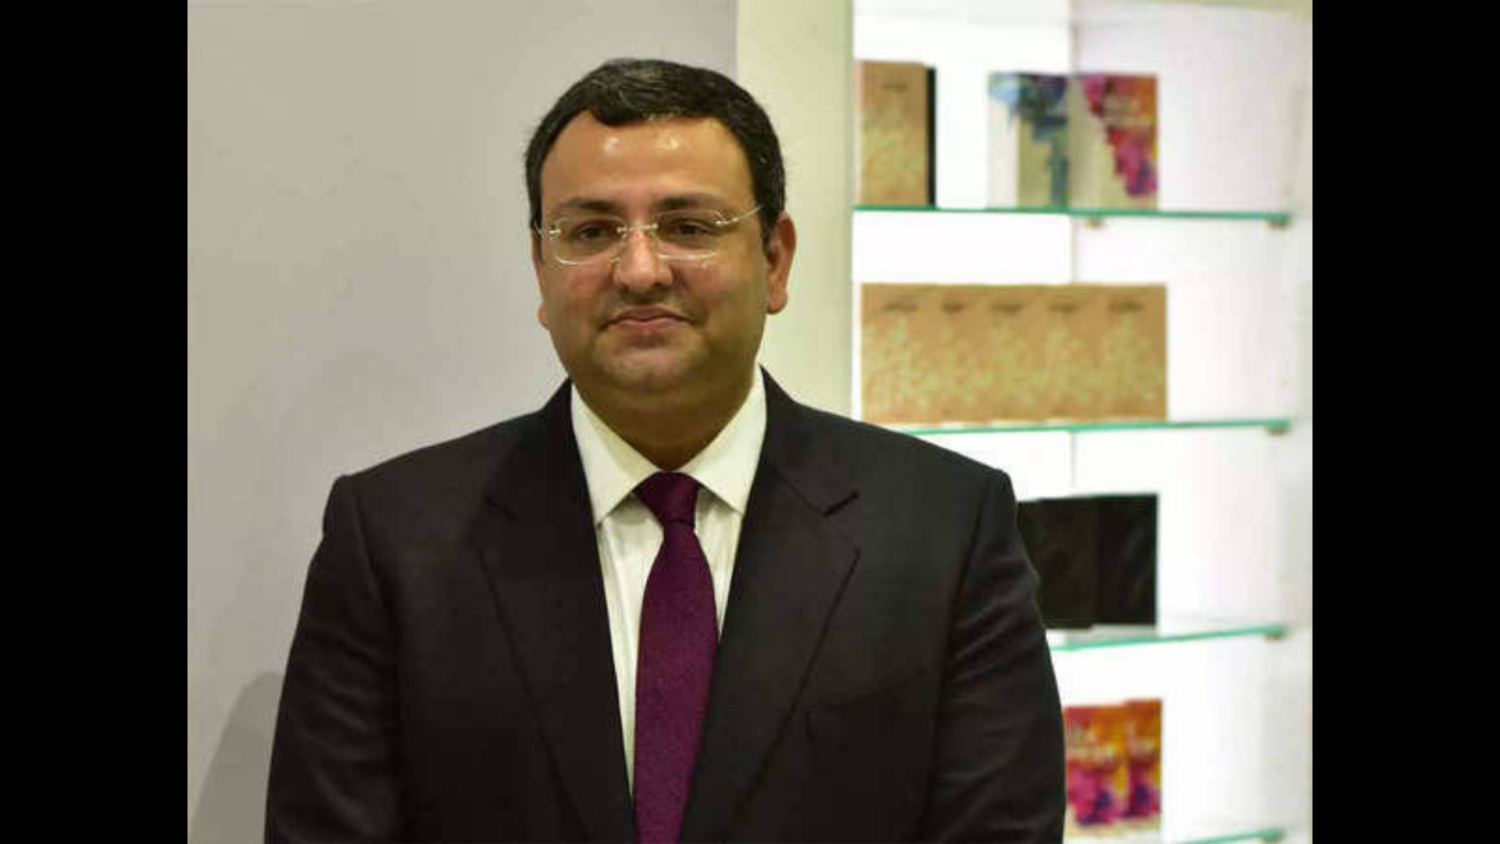 Cyrus Mistry dies at 54, condolences pour in on Twitter